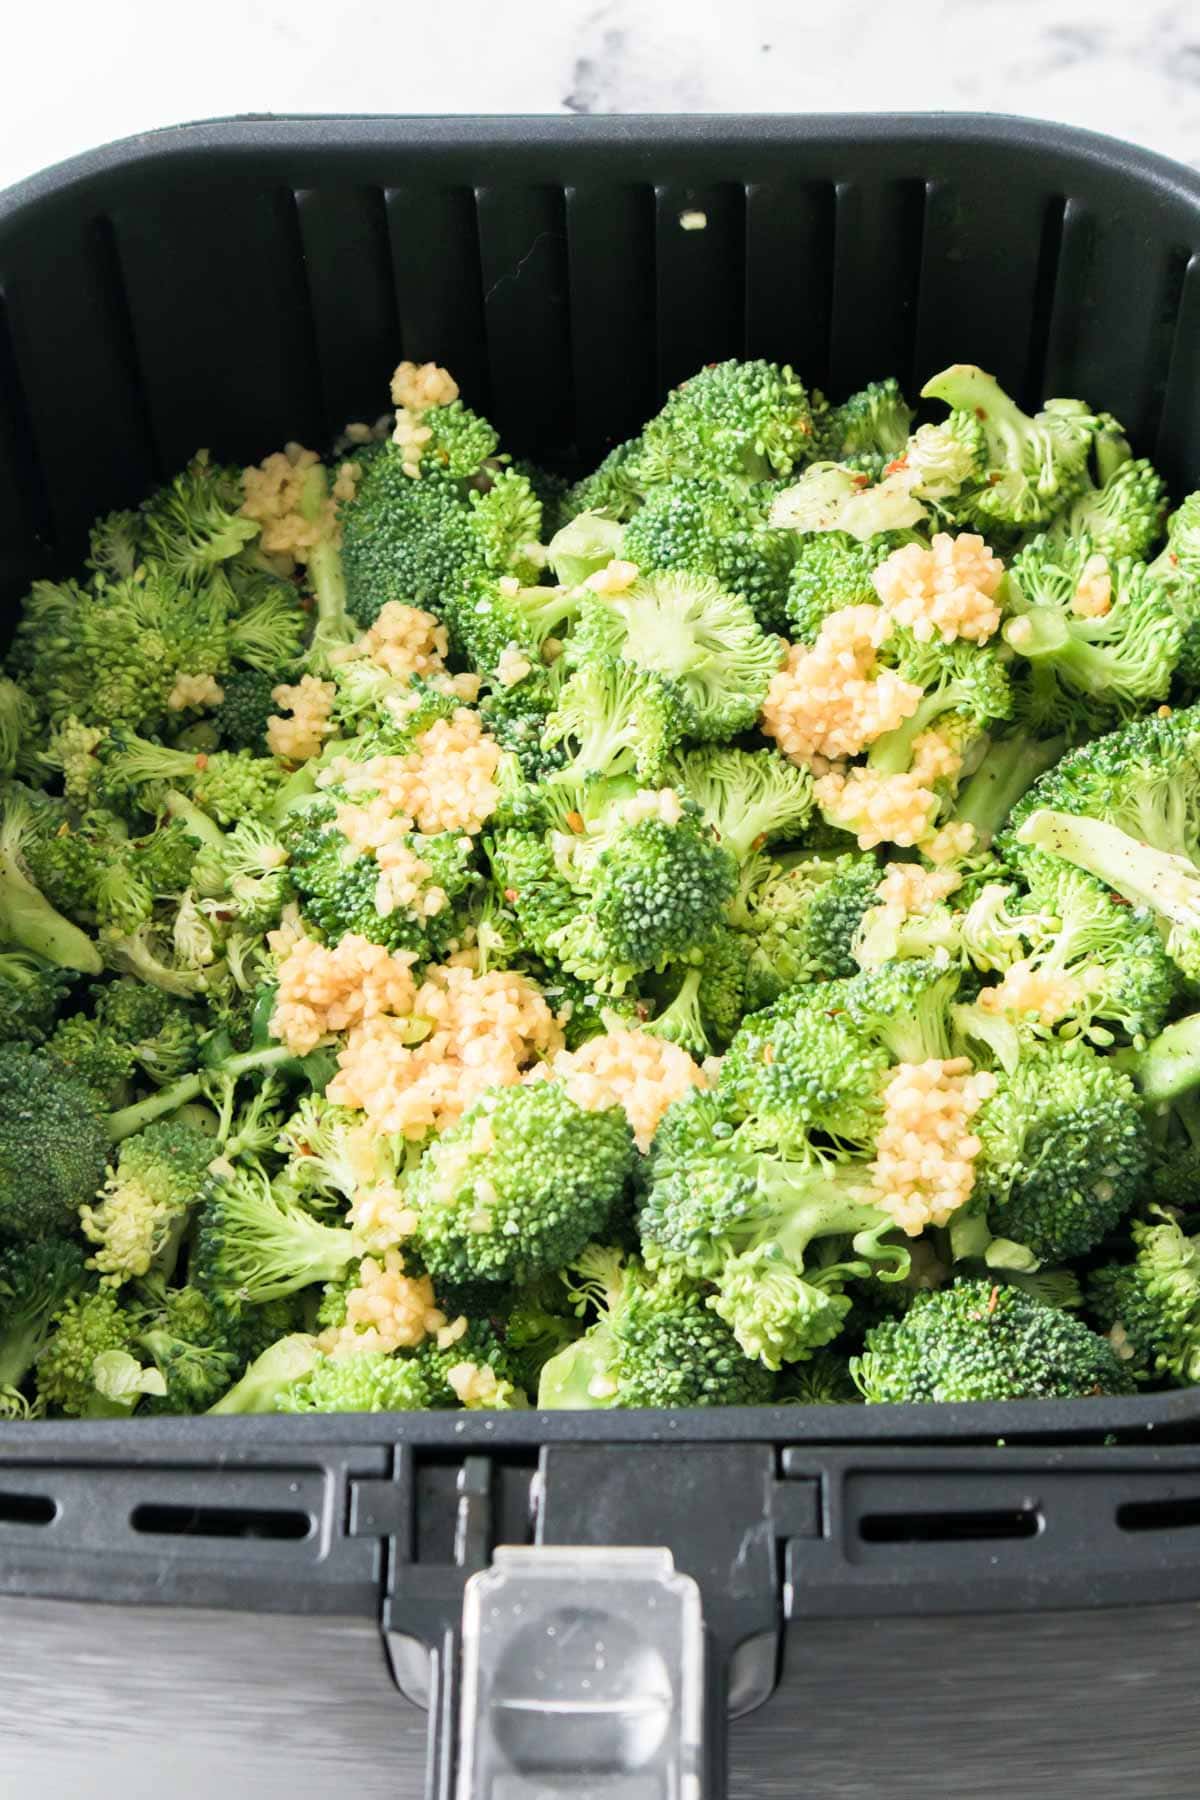 The air fryer basket with broccoli and garlic scattered over the top. 